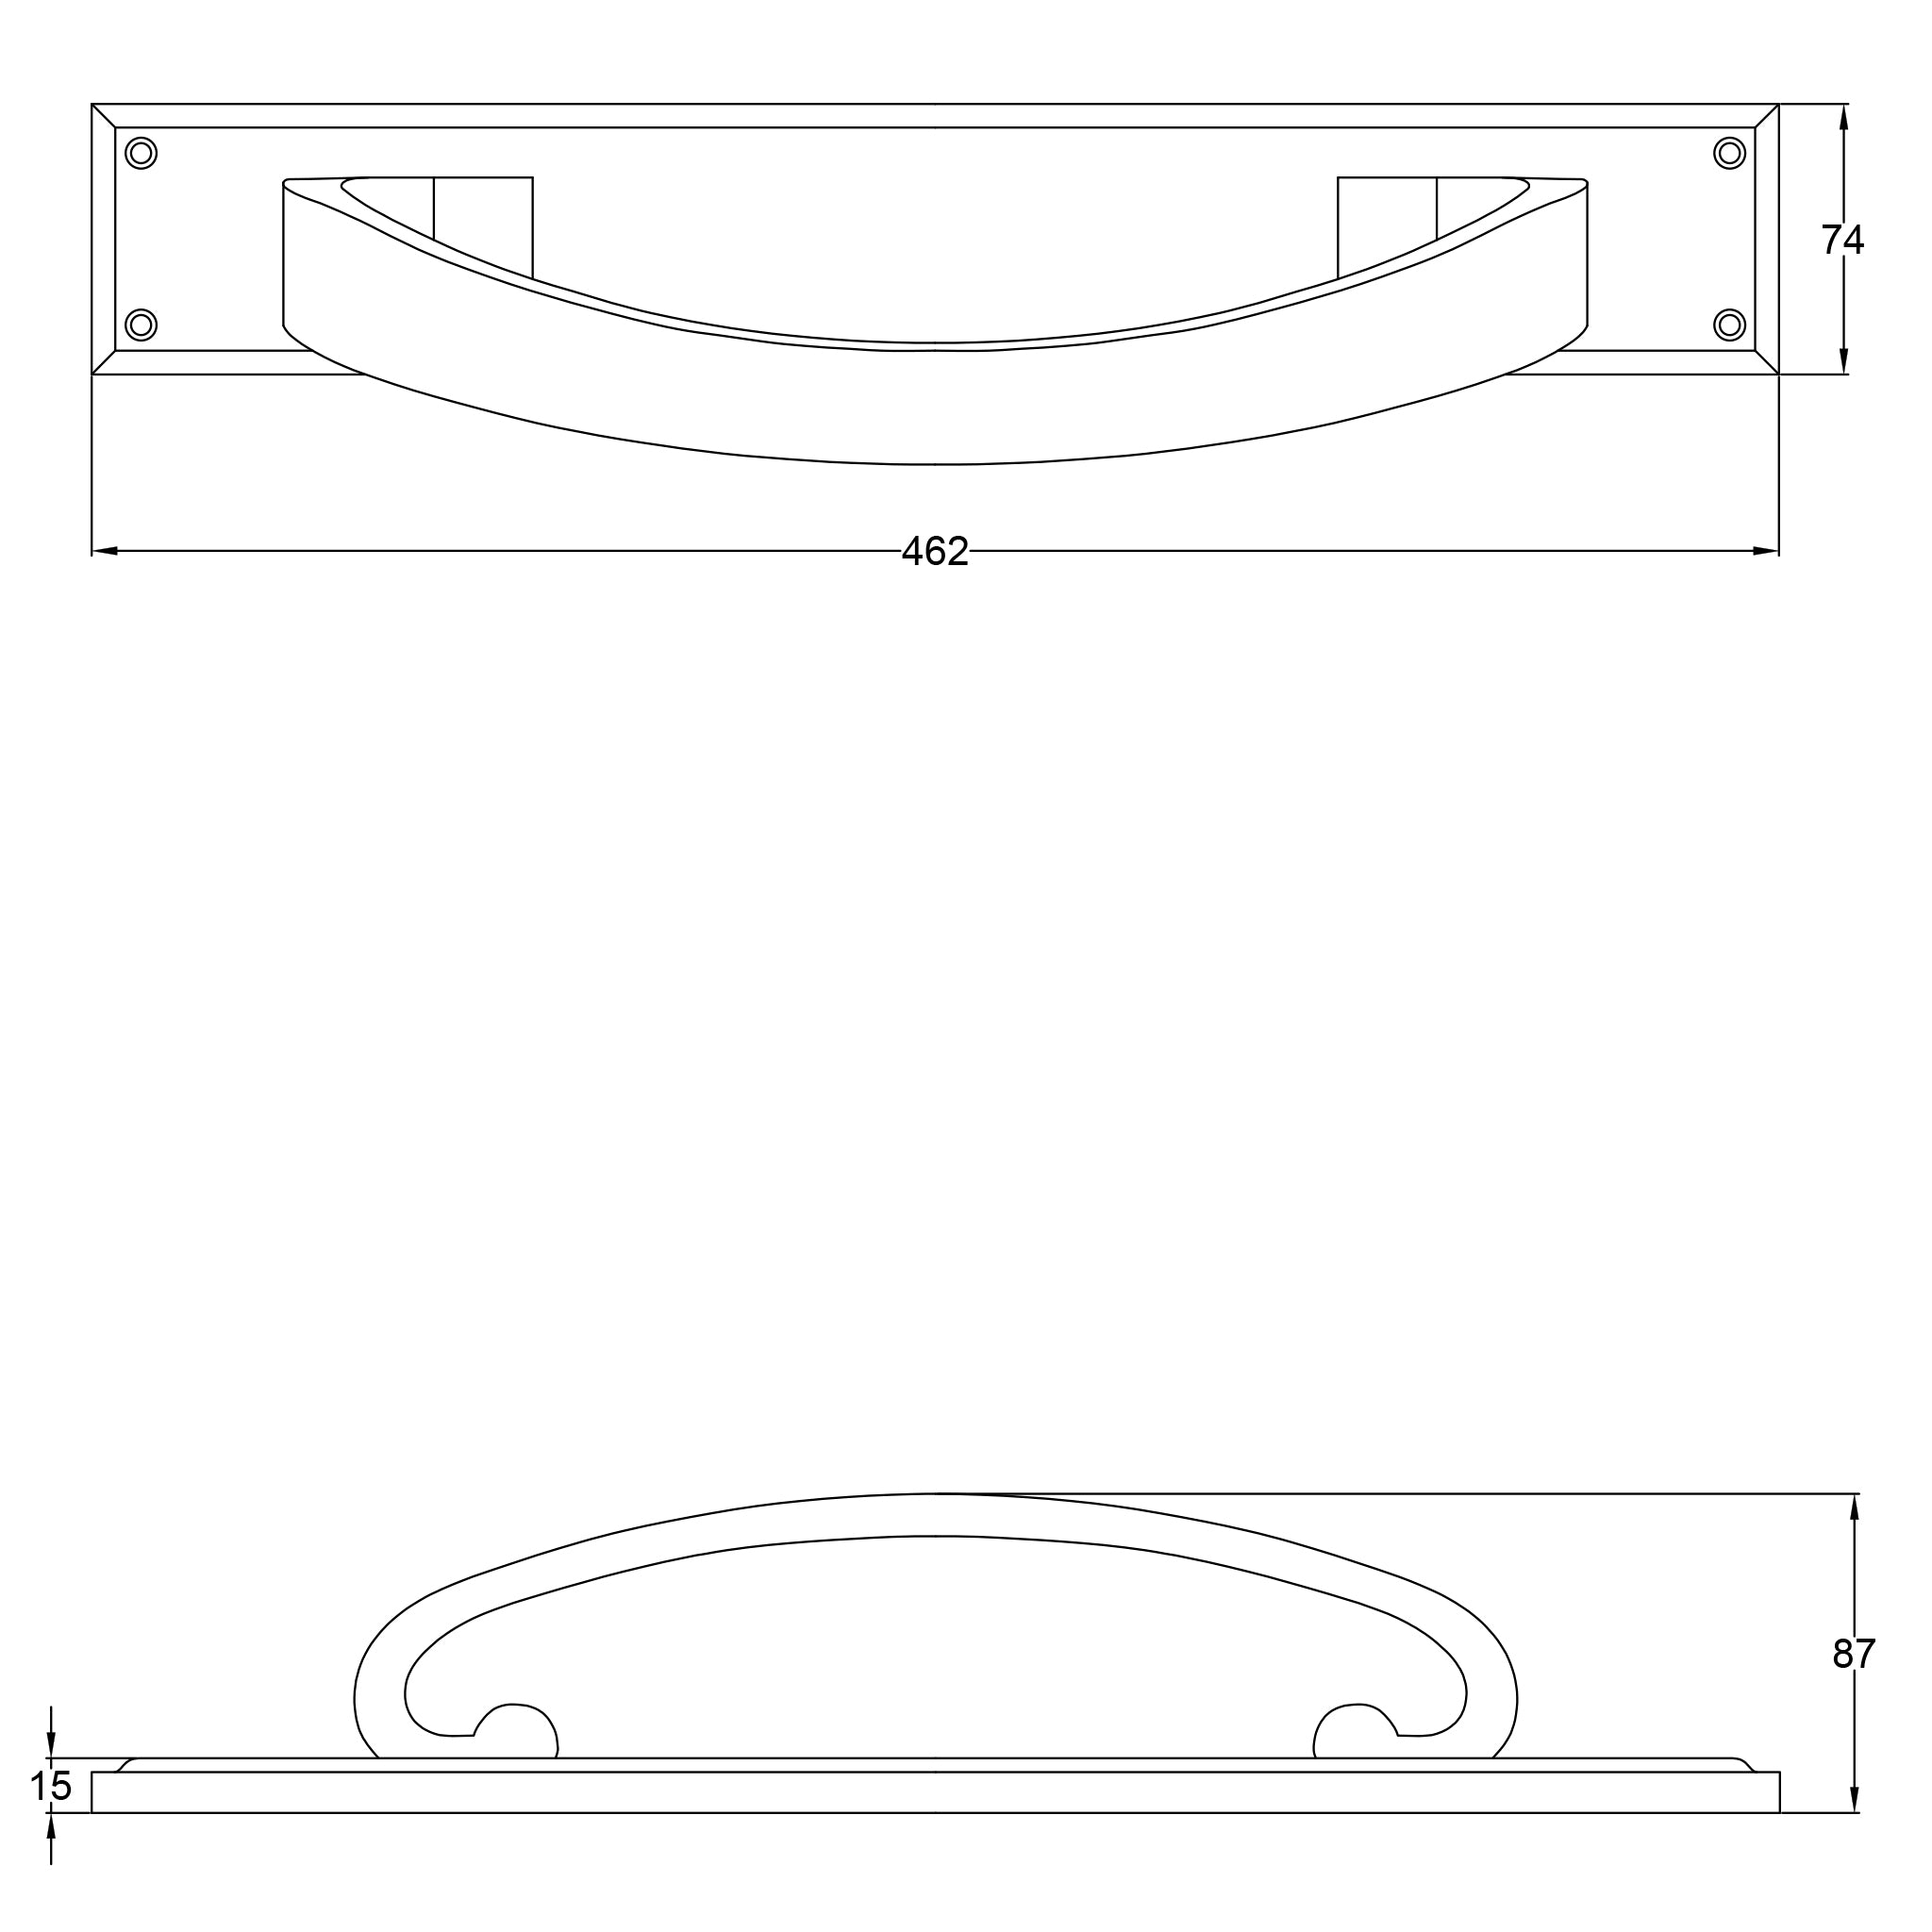 SHOW Technical Drawing of Door Pull Handle on Back Plate